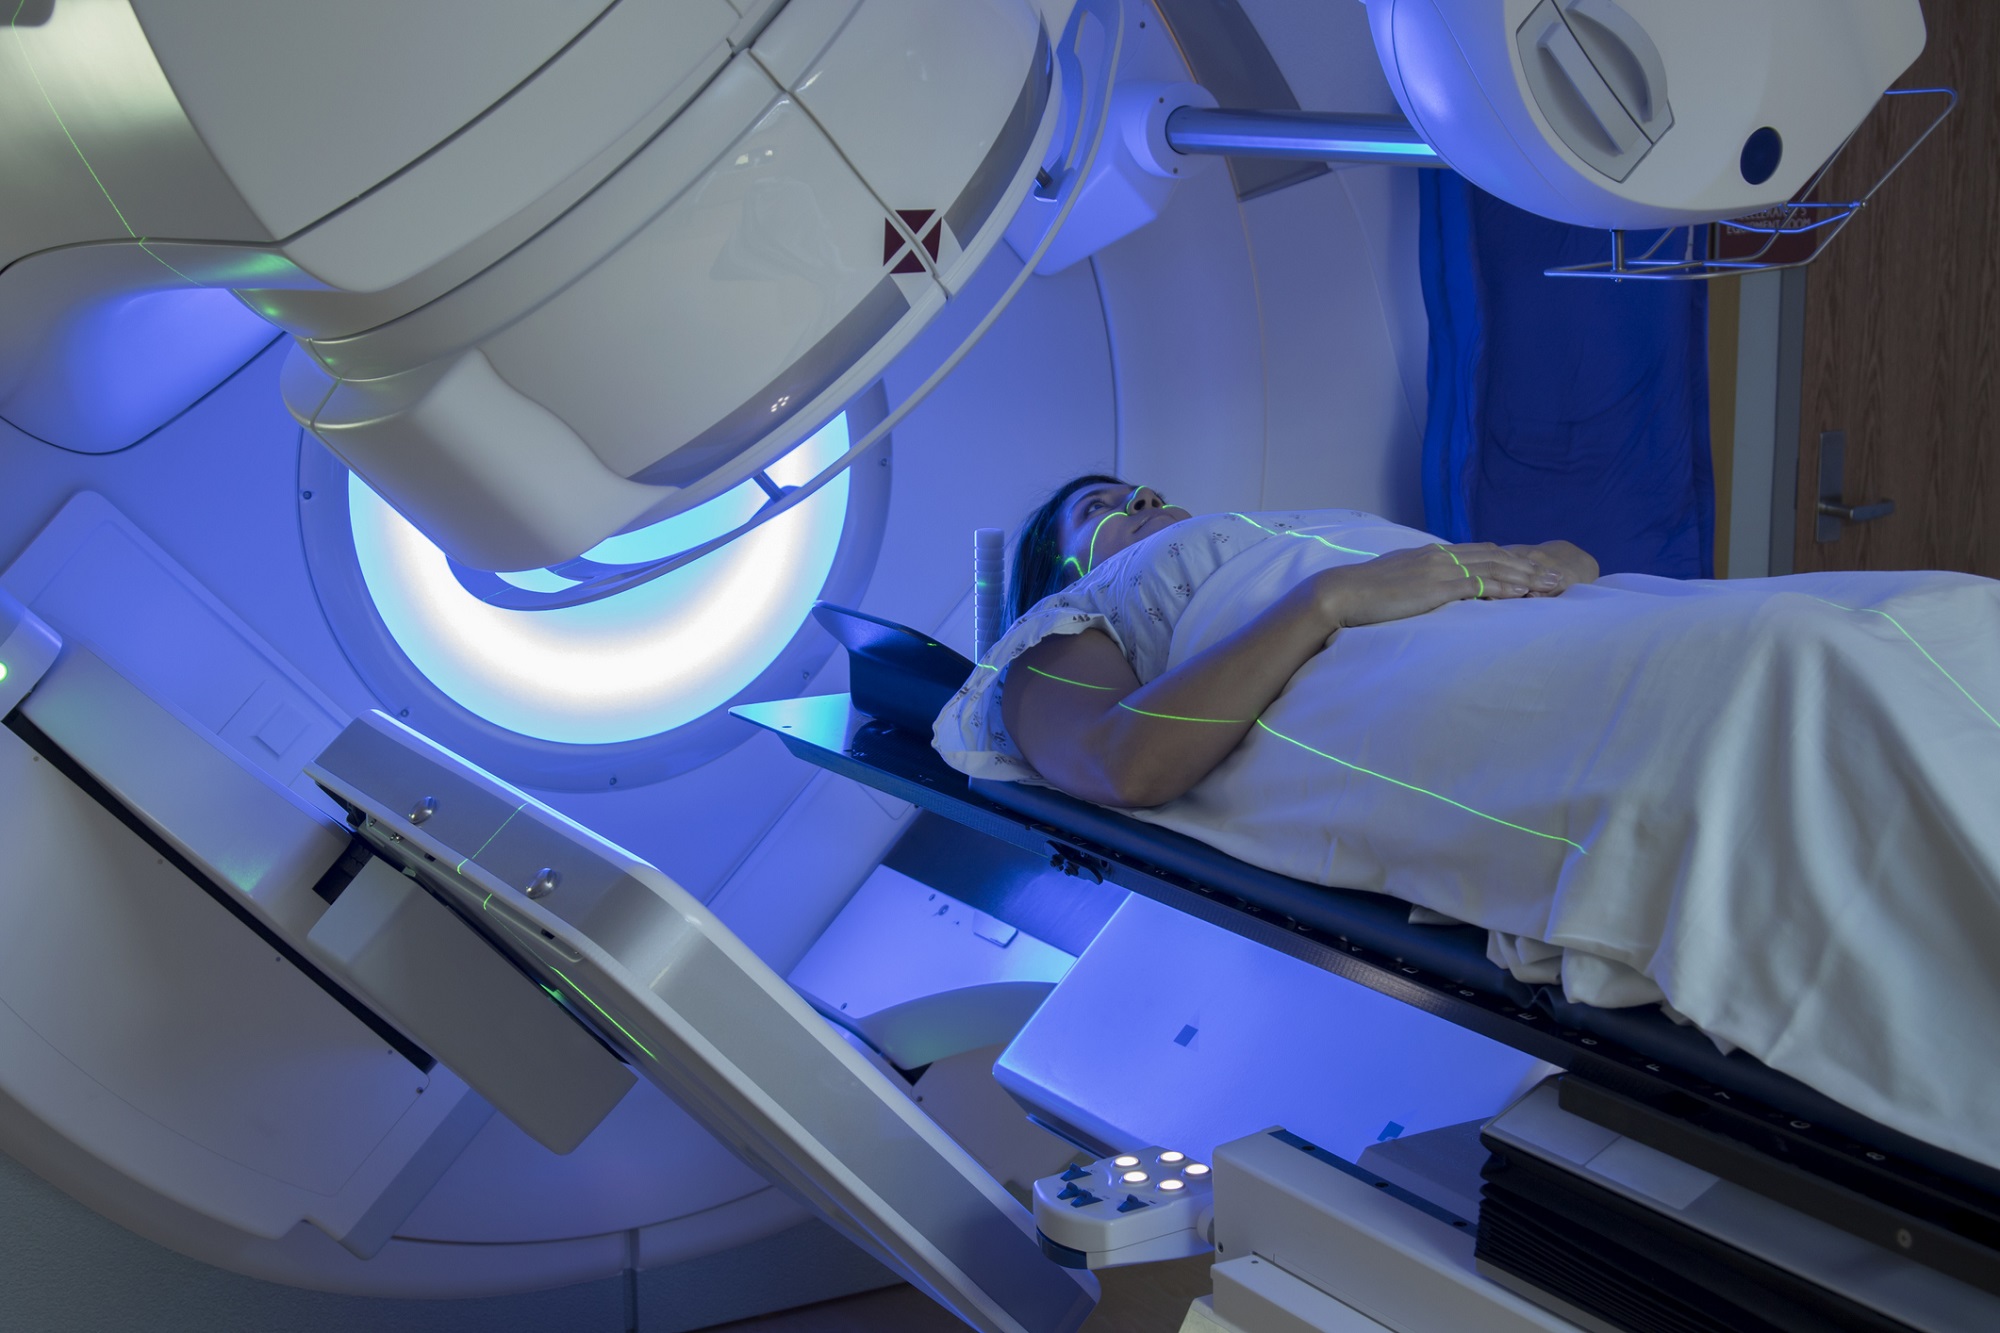 Global Radiation-Induced Myelosuppression Treatment Industry Size By 2028 | FMI